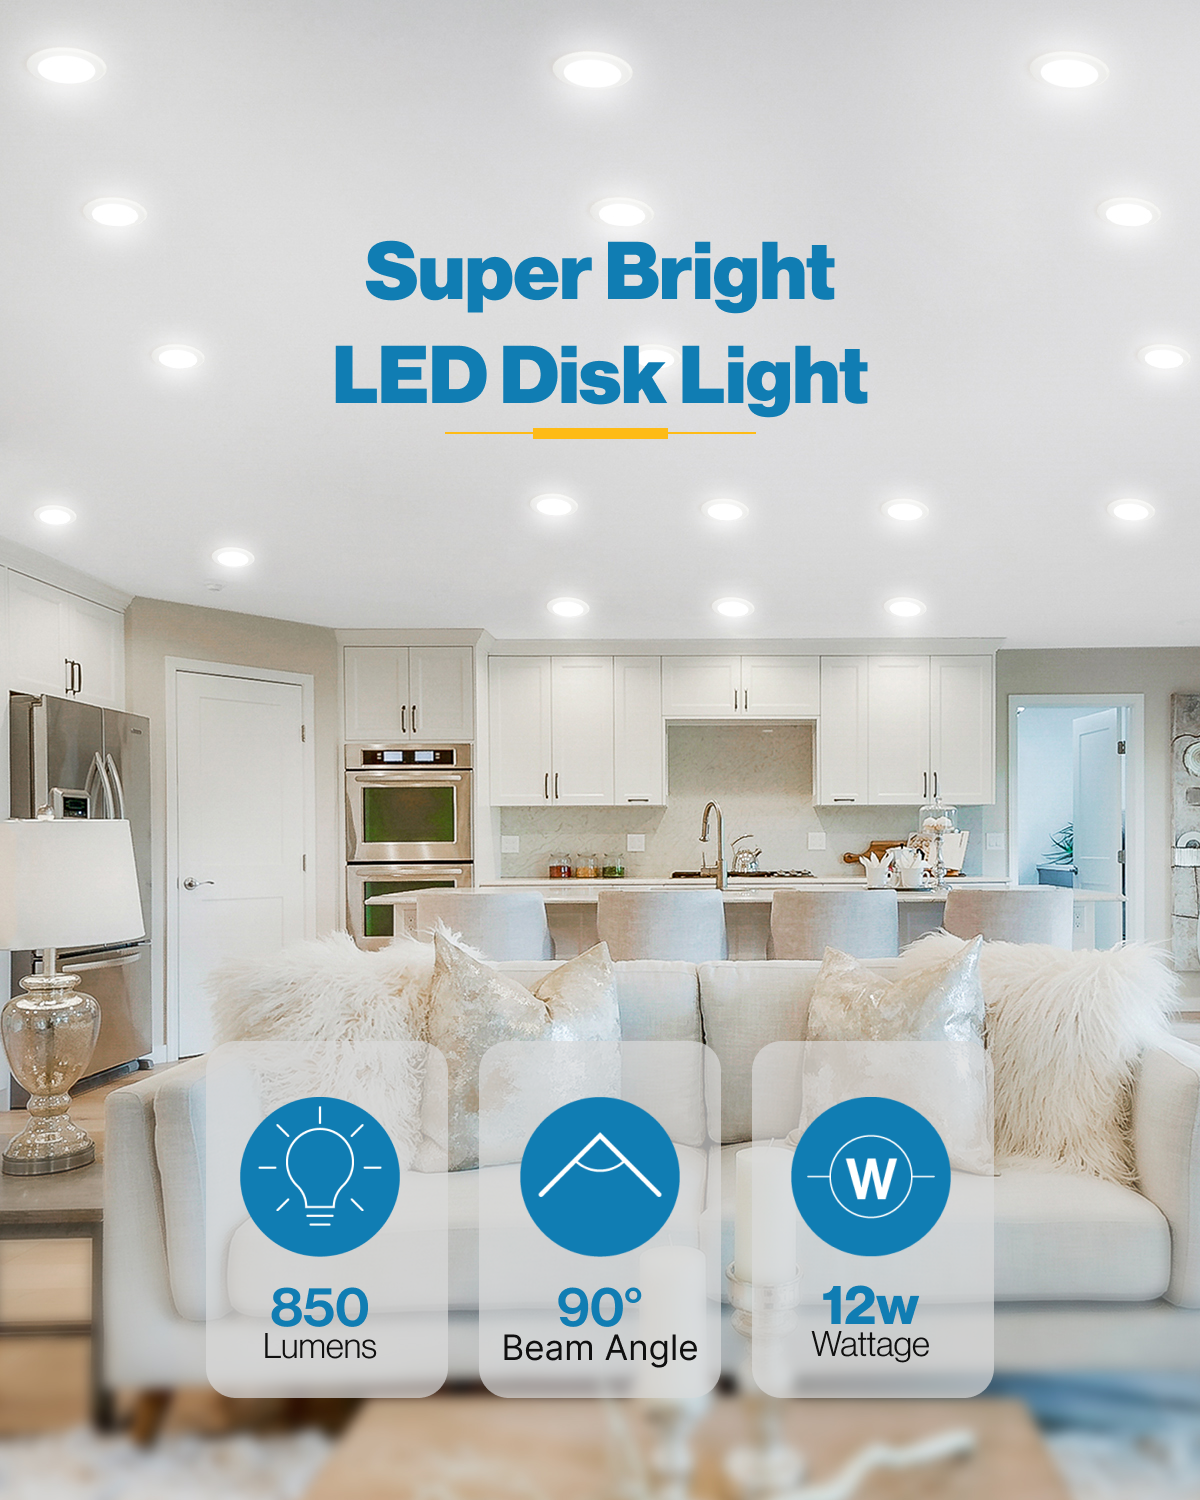 Illuminate your living spaces with brighter and clearer coverage.